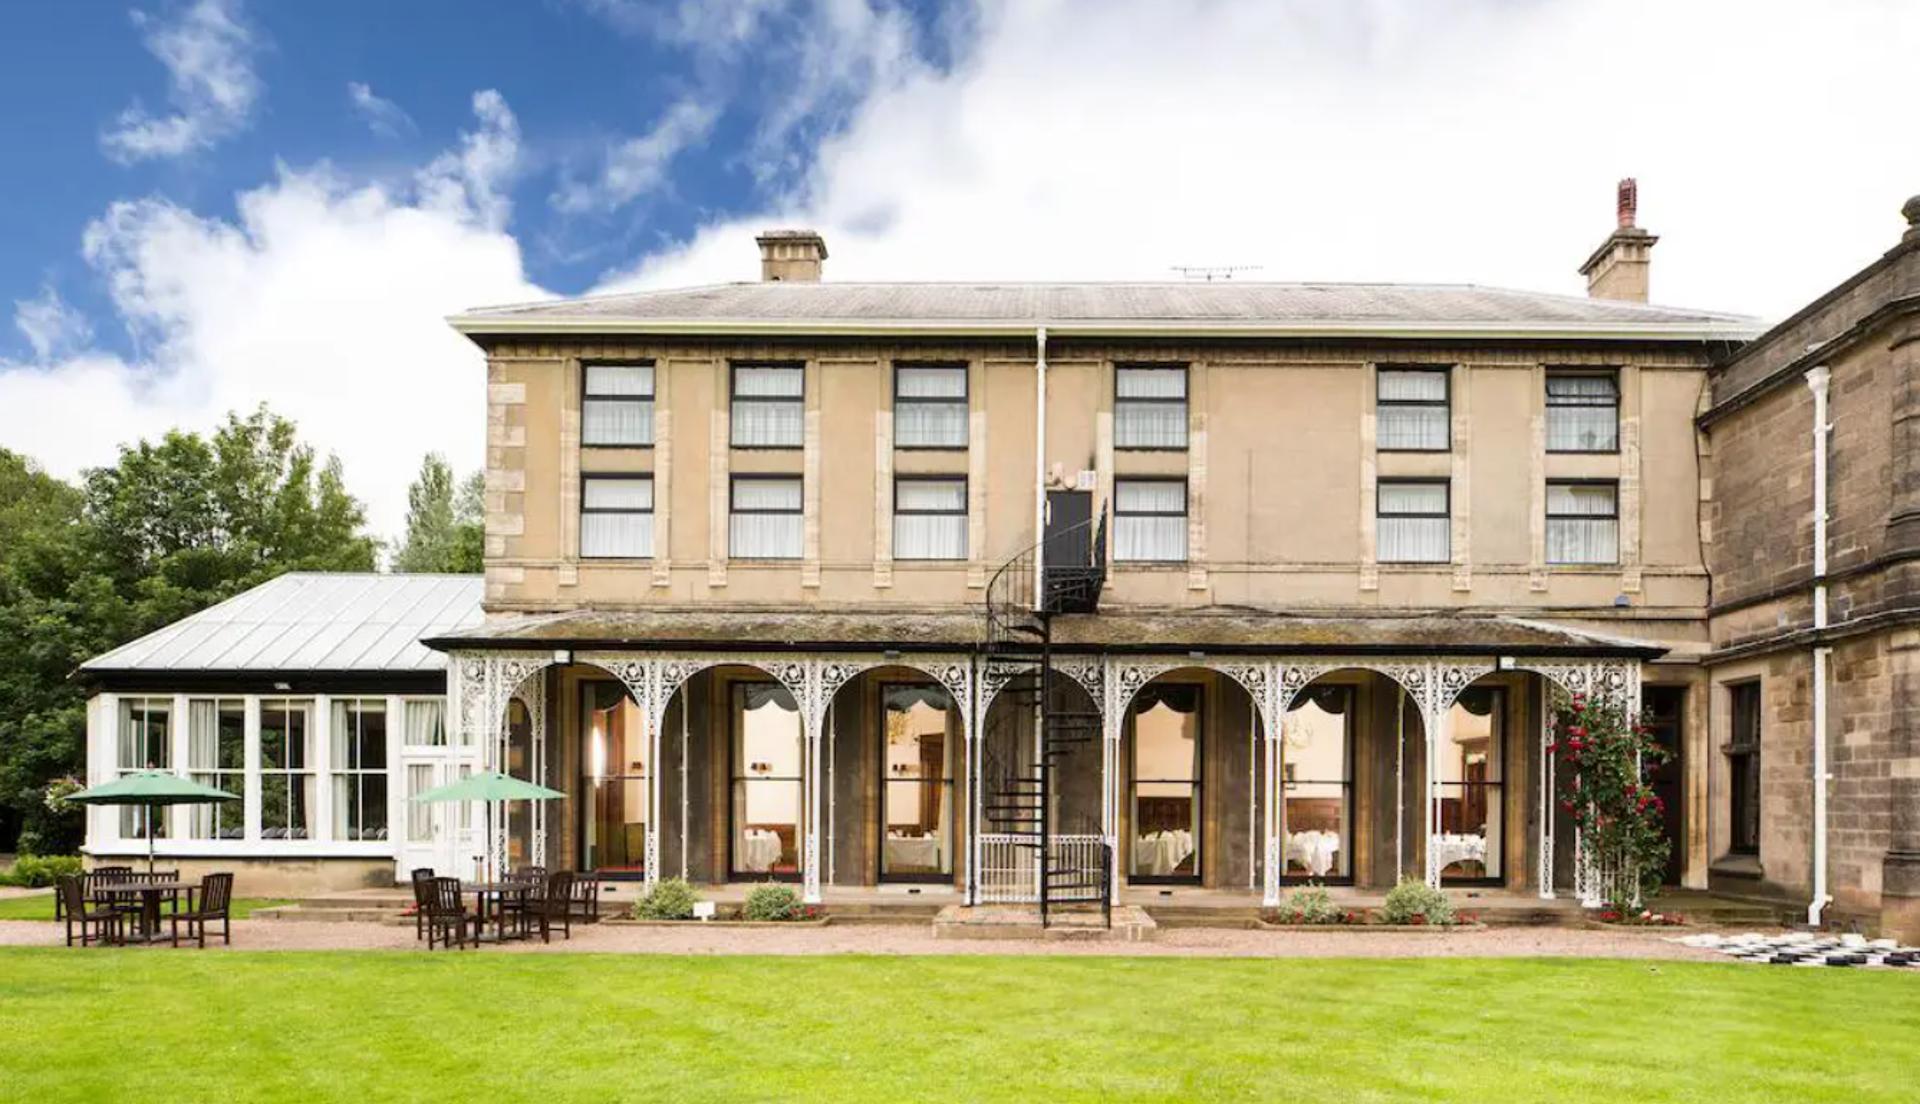 50-bedroom country house hotel on the market for £2.5m